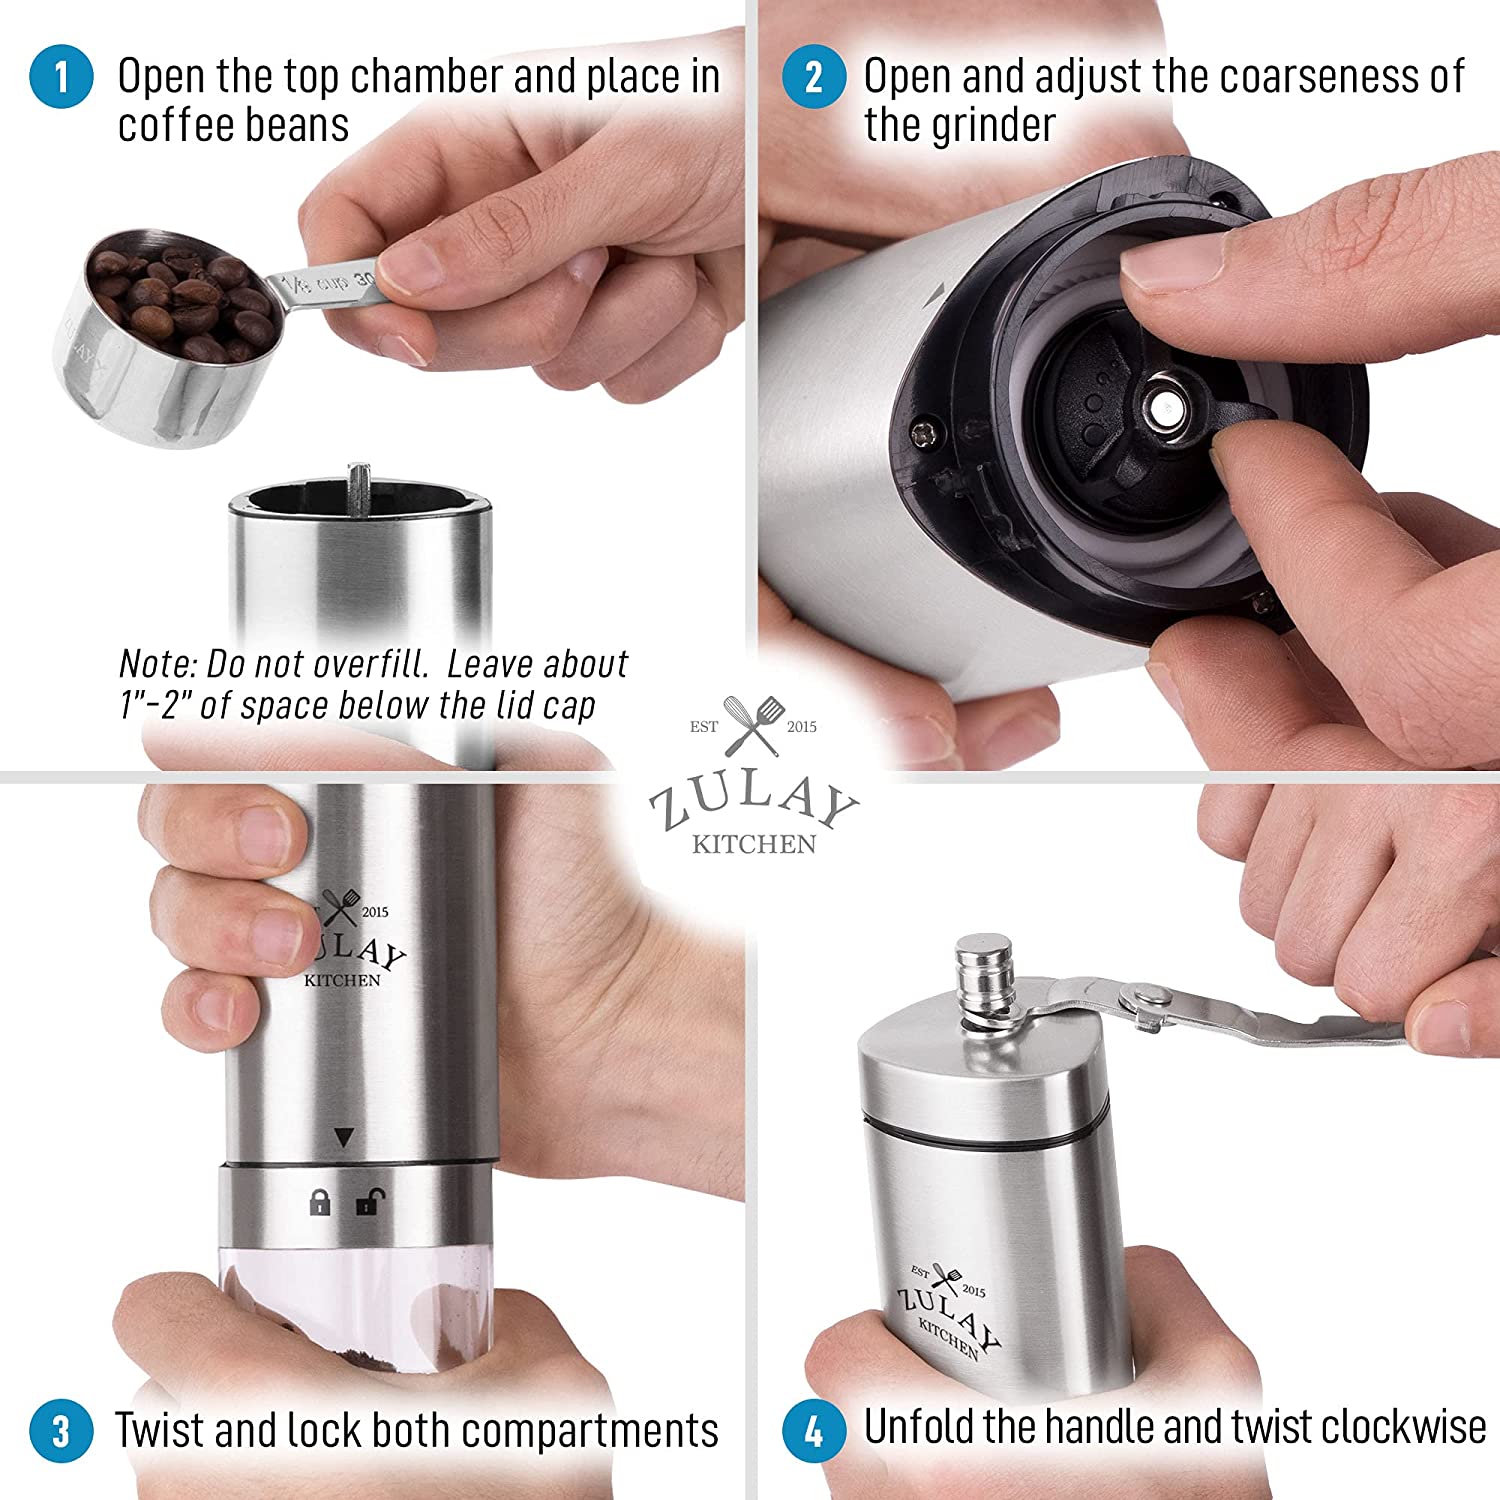 Manual Coffee Grinder With Foldable Handle - Zulay KitchenZulay Kitchen